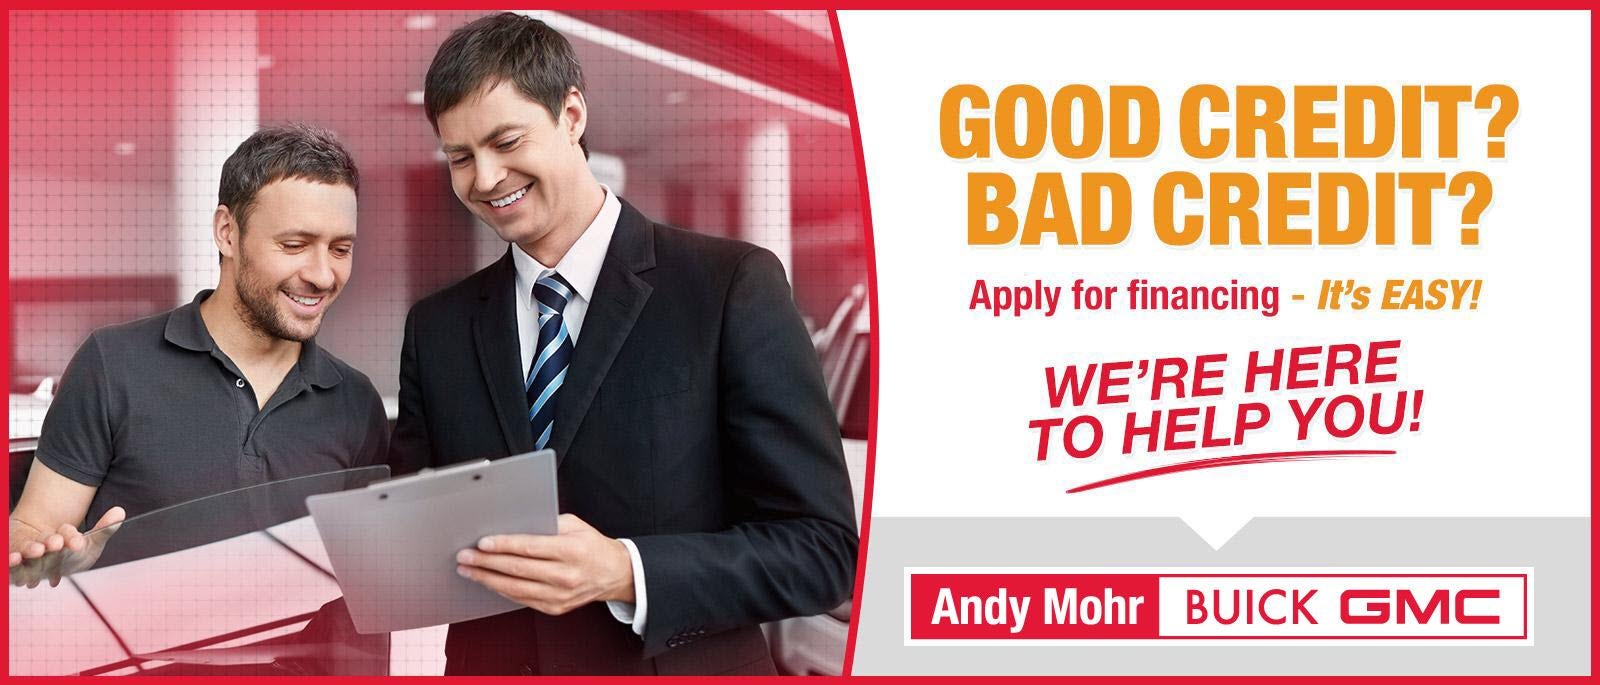 Good Credit? Bad Credit? We're here to help! Apply for Financing at Andy Mohr Buick GMC in Fishers IN